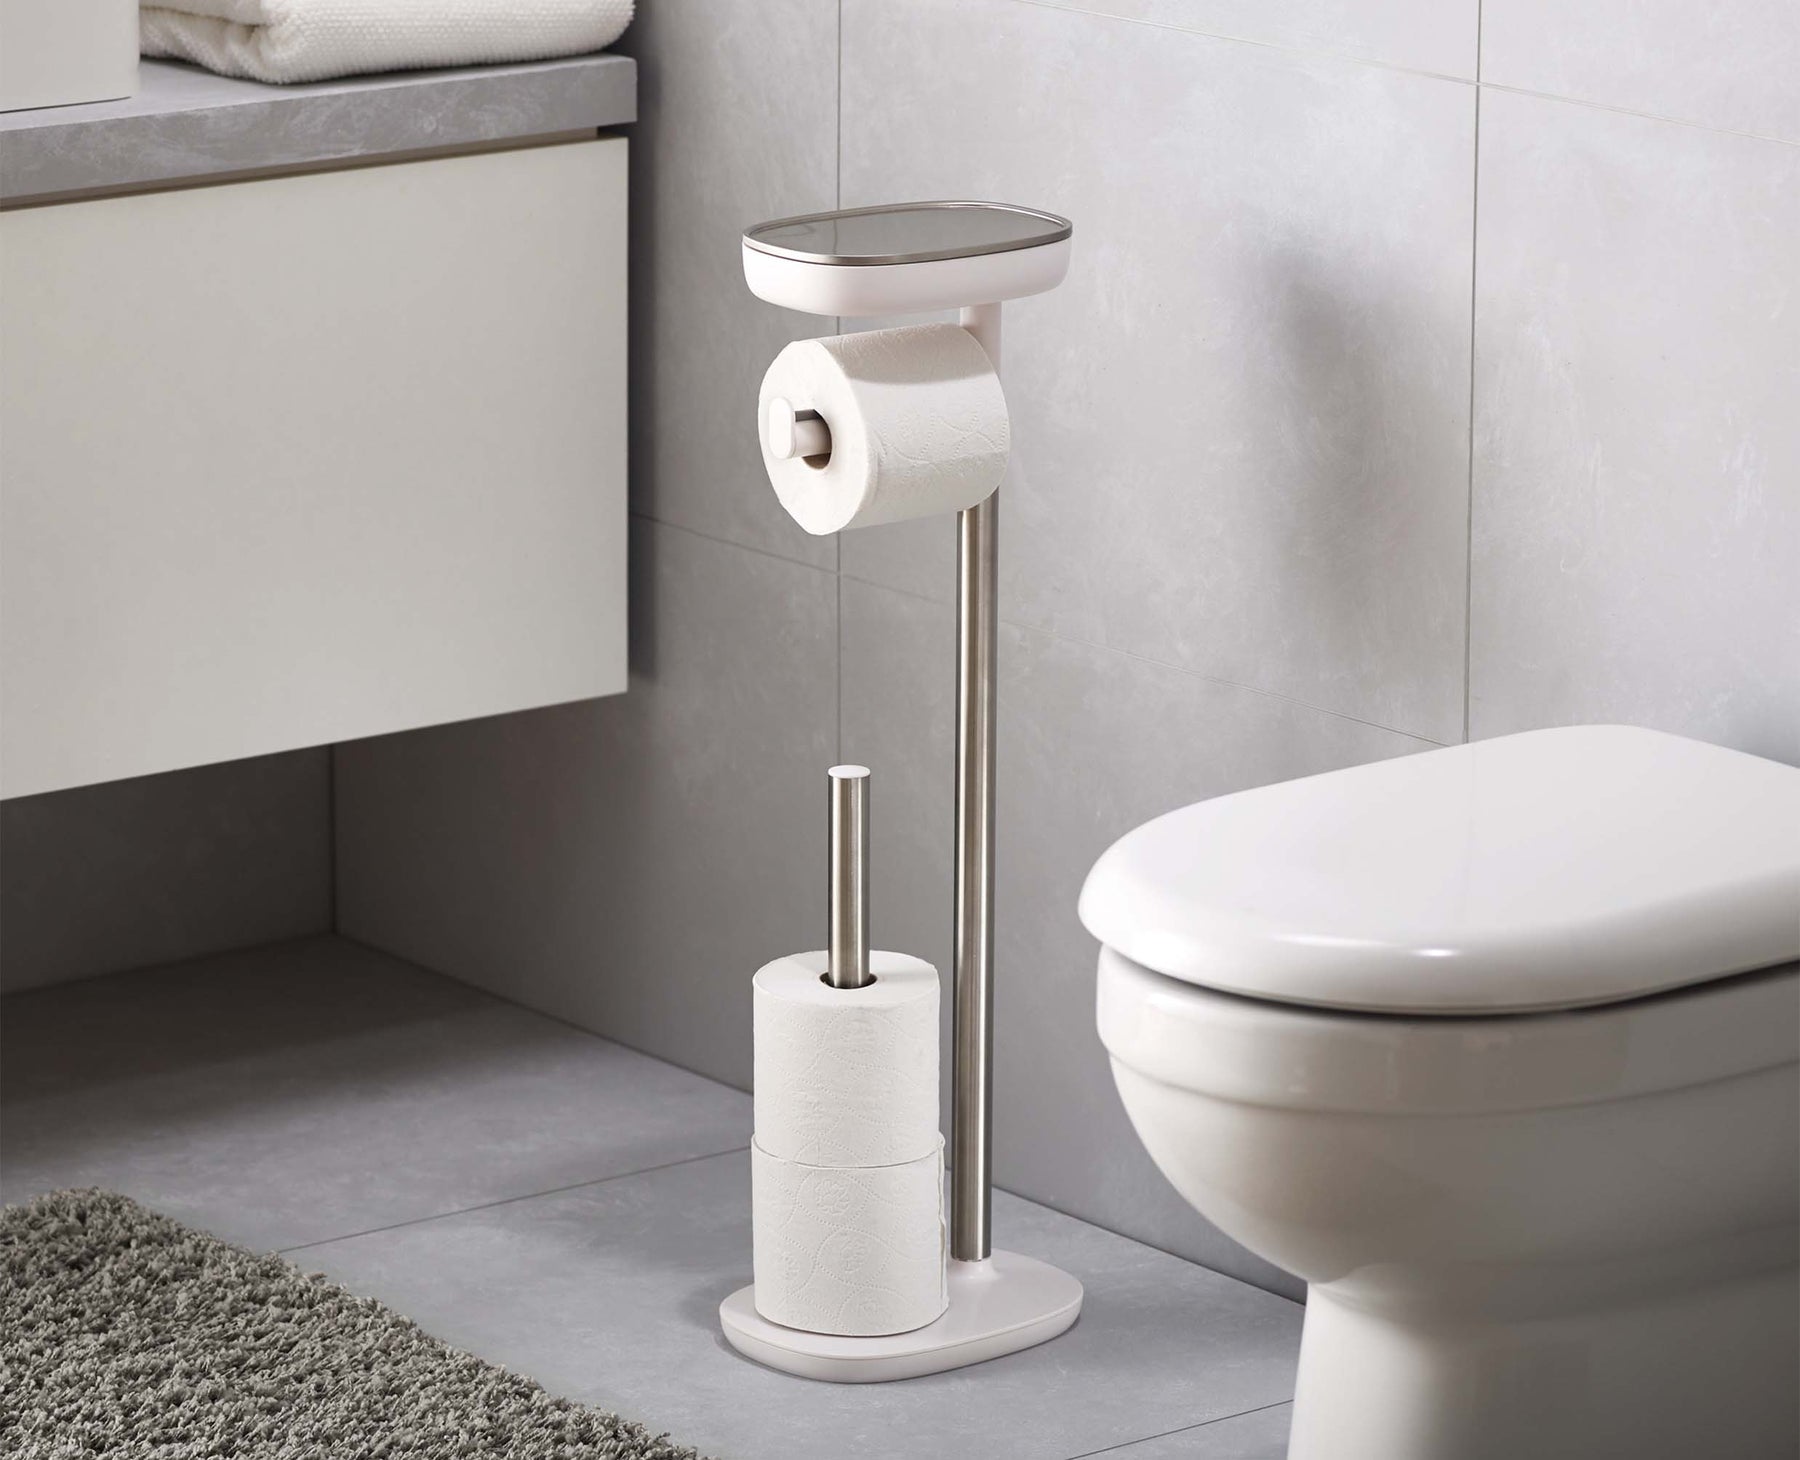 EasyStore™ Toilet Paper Holder - 70518 - Image 3